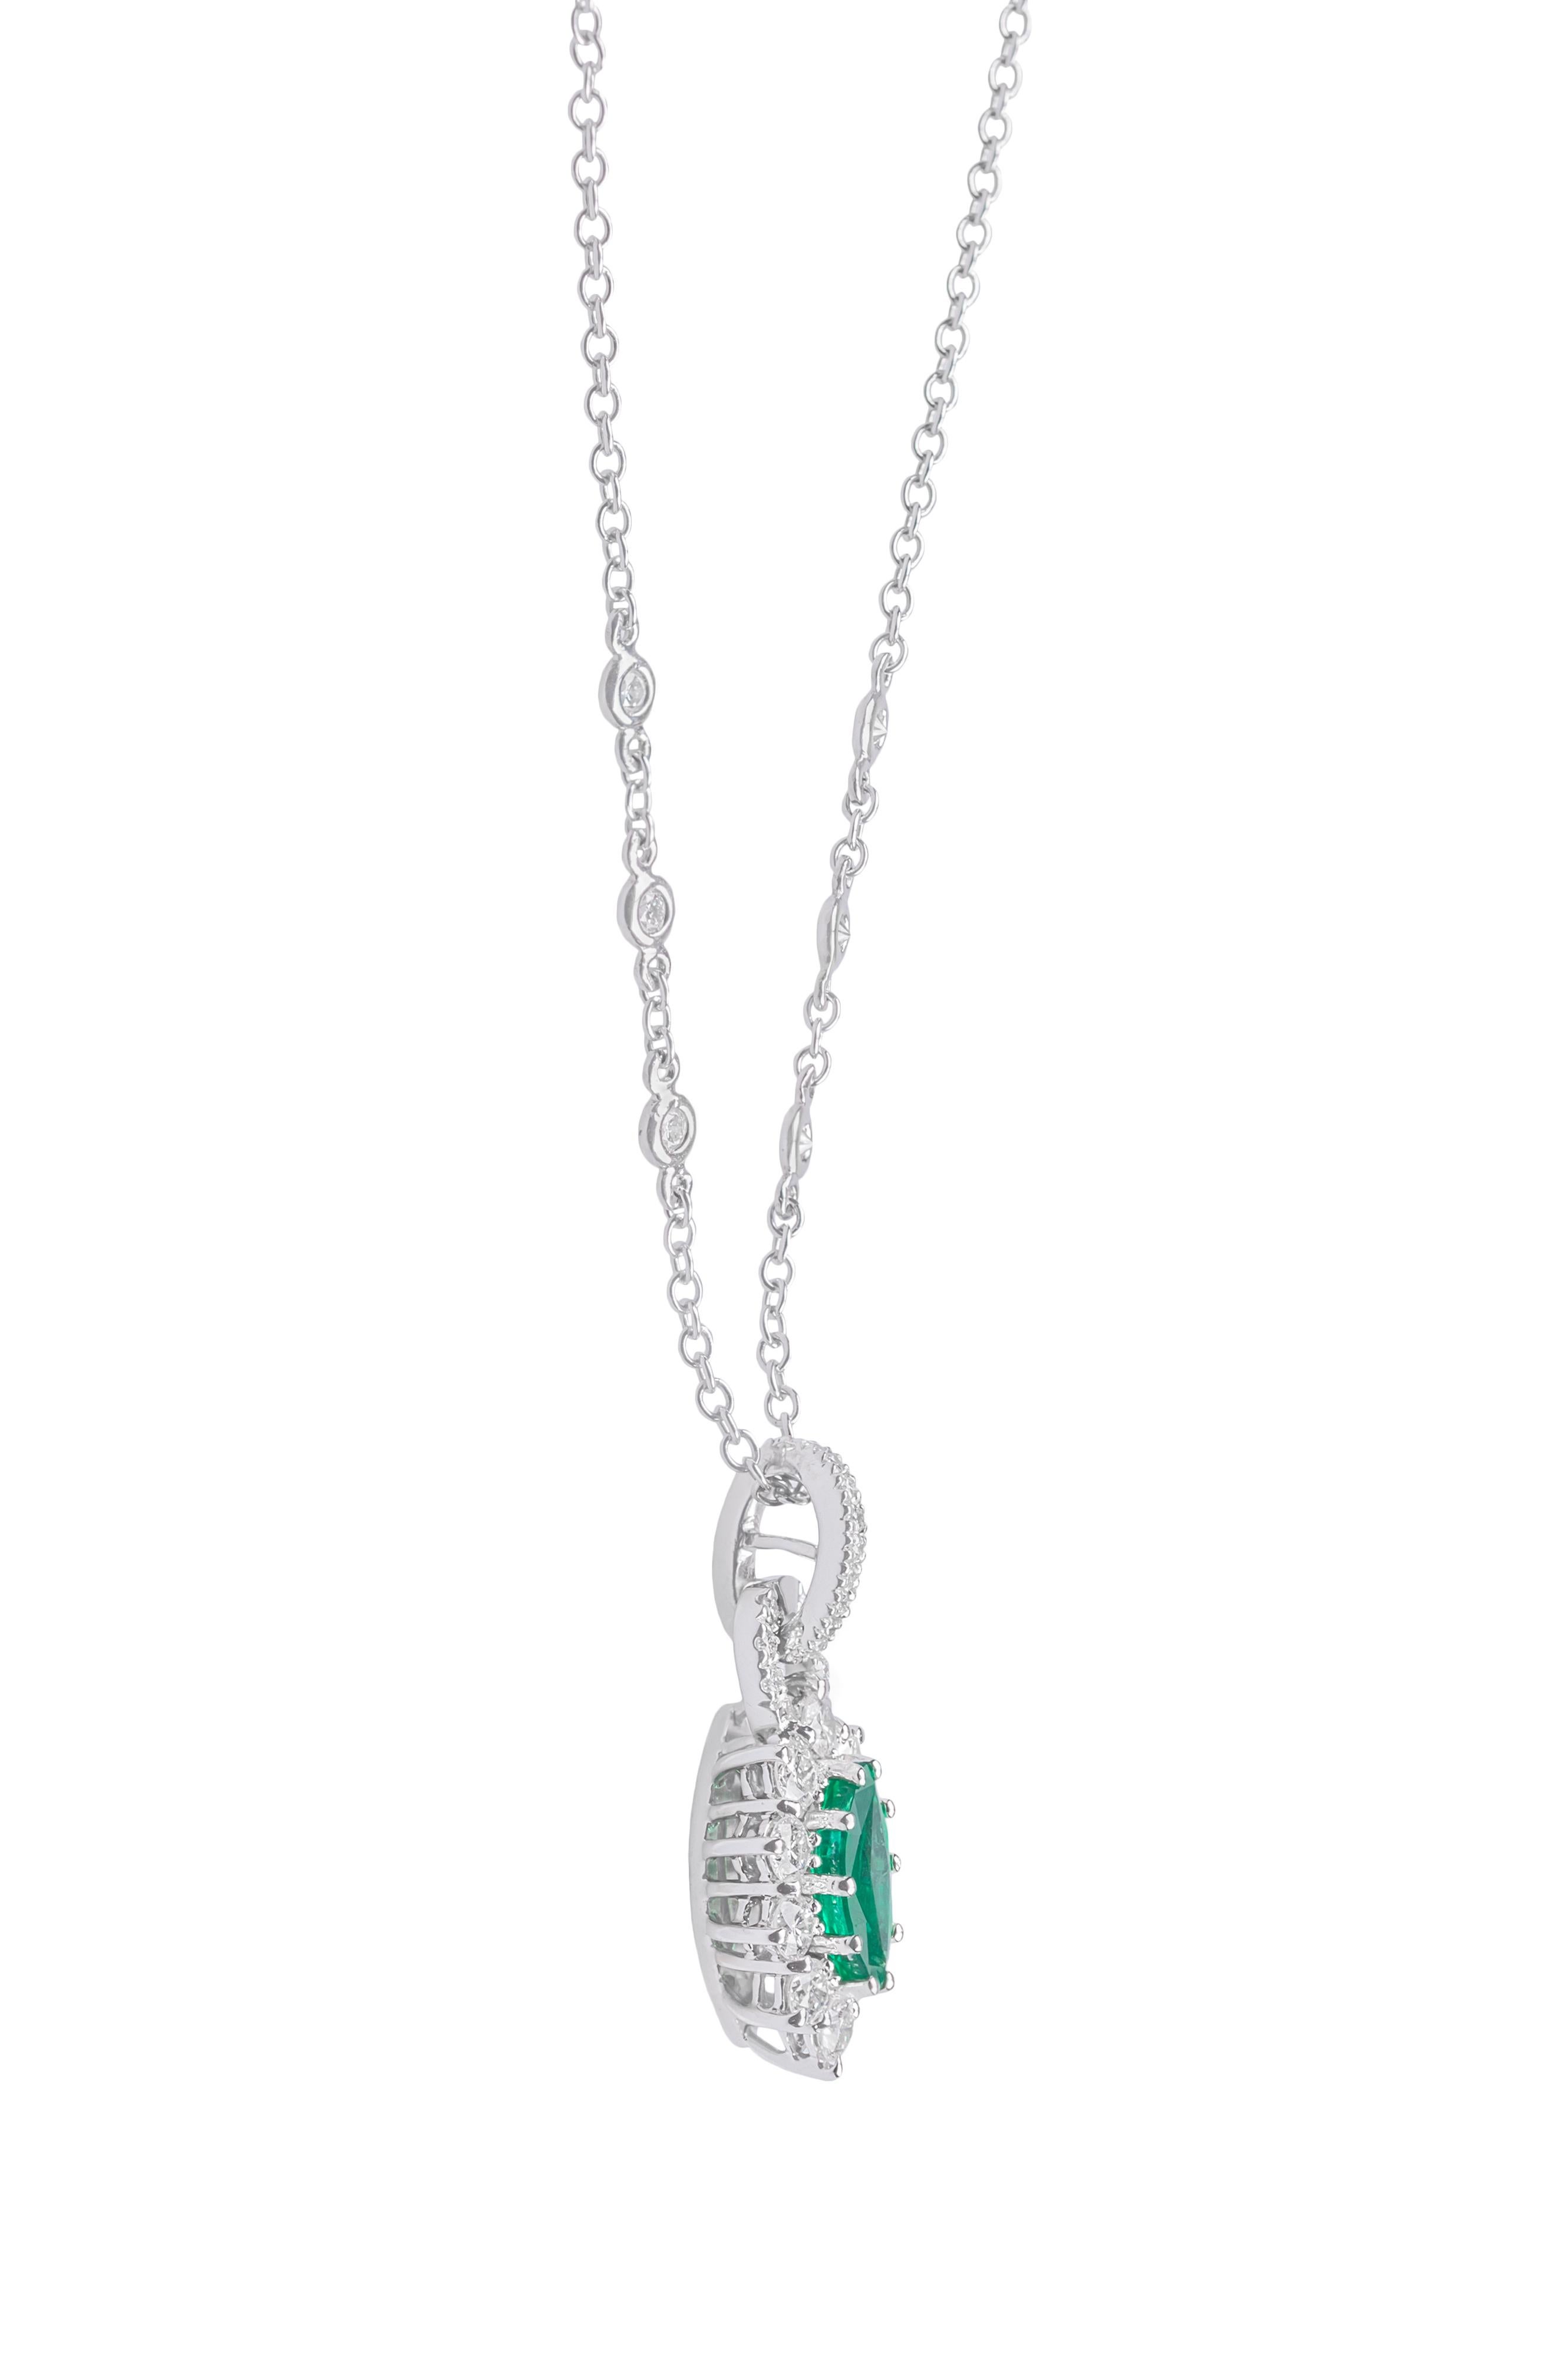 This stunning 18K white gold necklace is made in Italy by Fanuele dal 1905. It features 6 brilliant cut diamonds on the chain and a navette or marquise cut emerald surrounded by 10 brilliant cut diamonds.
Total emerald content is 1.30 ct
Total